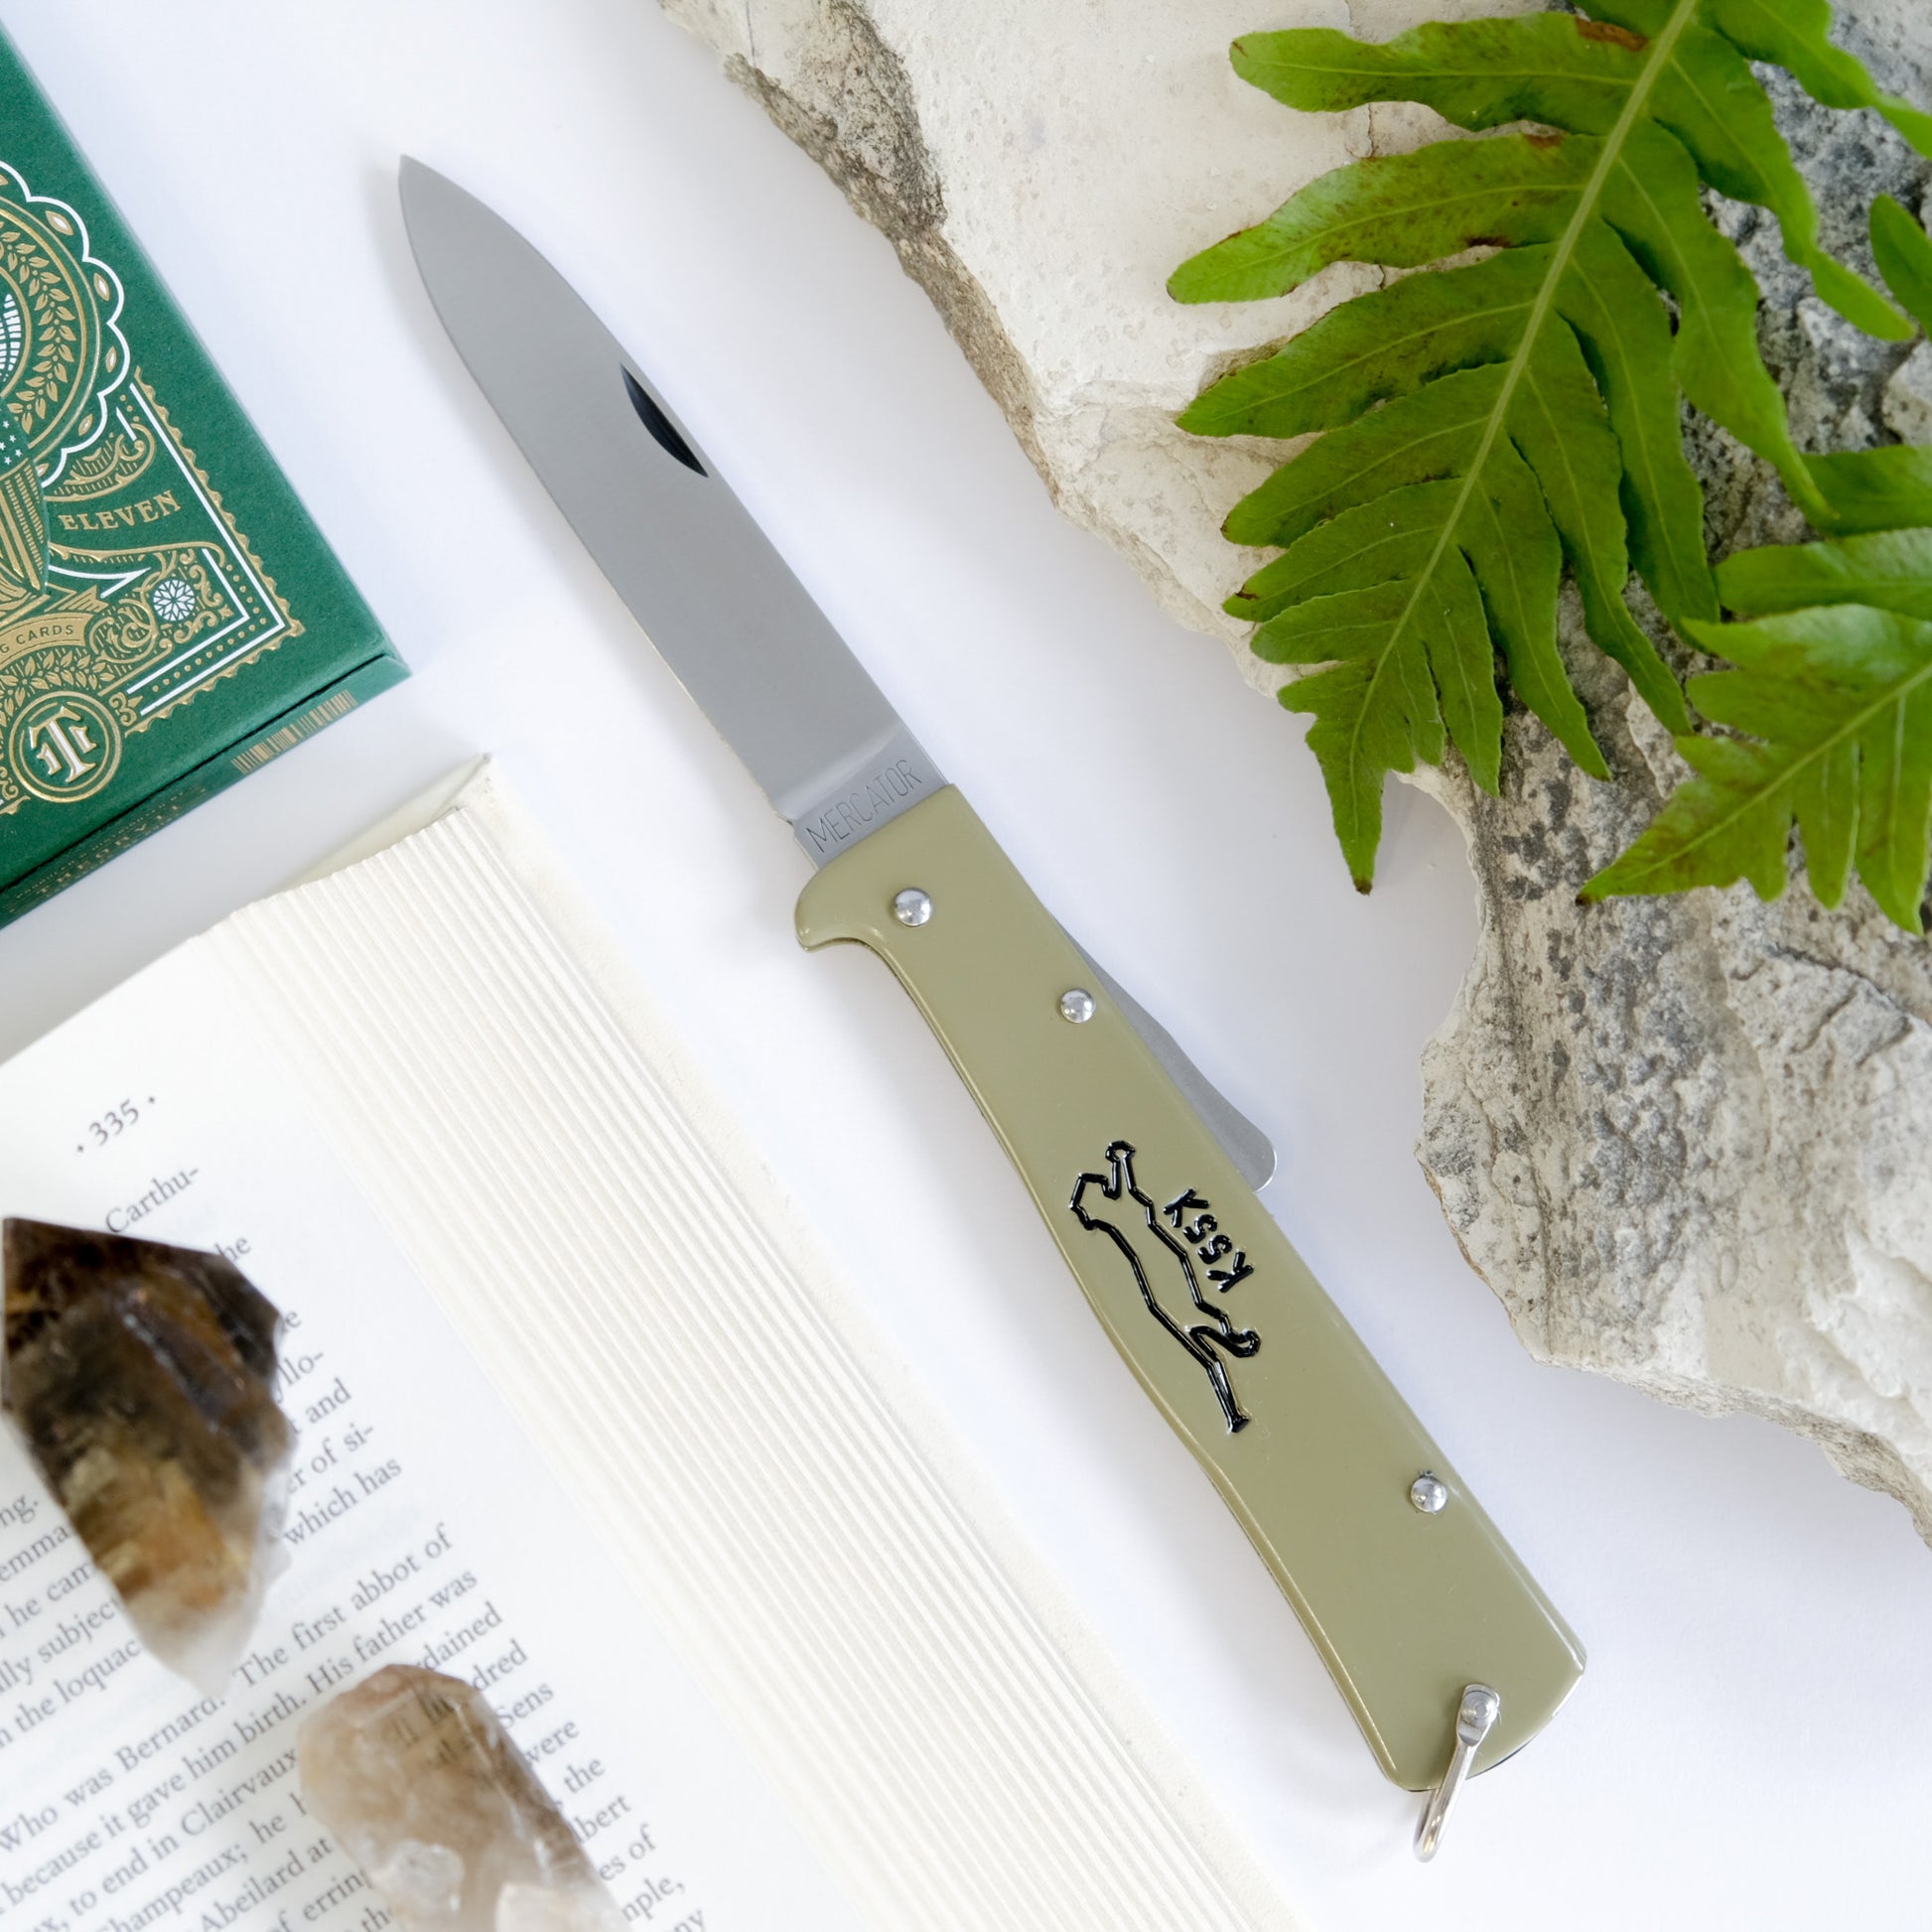 877 Workshop - Hand engraved Otter Mercator knife with a